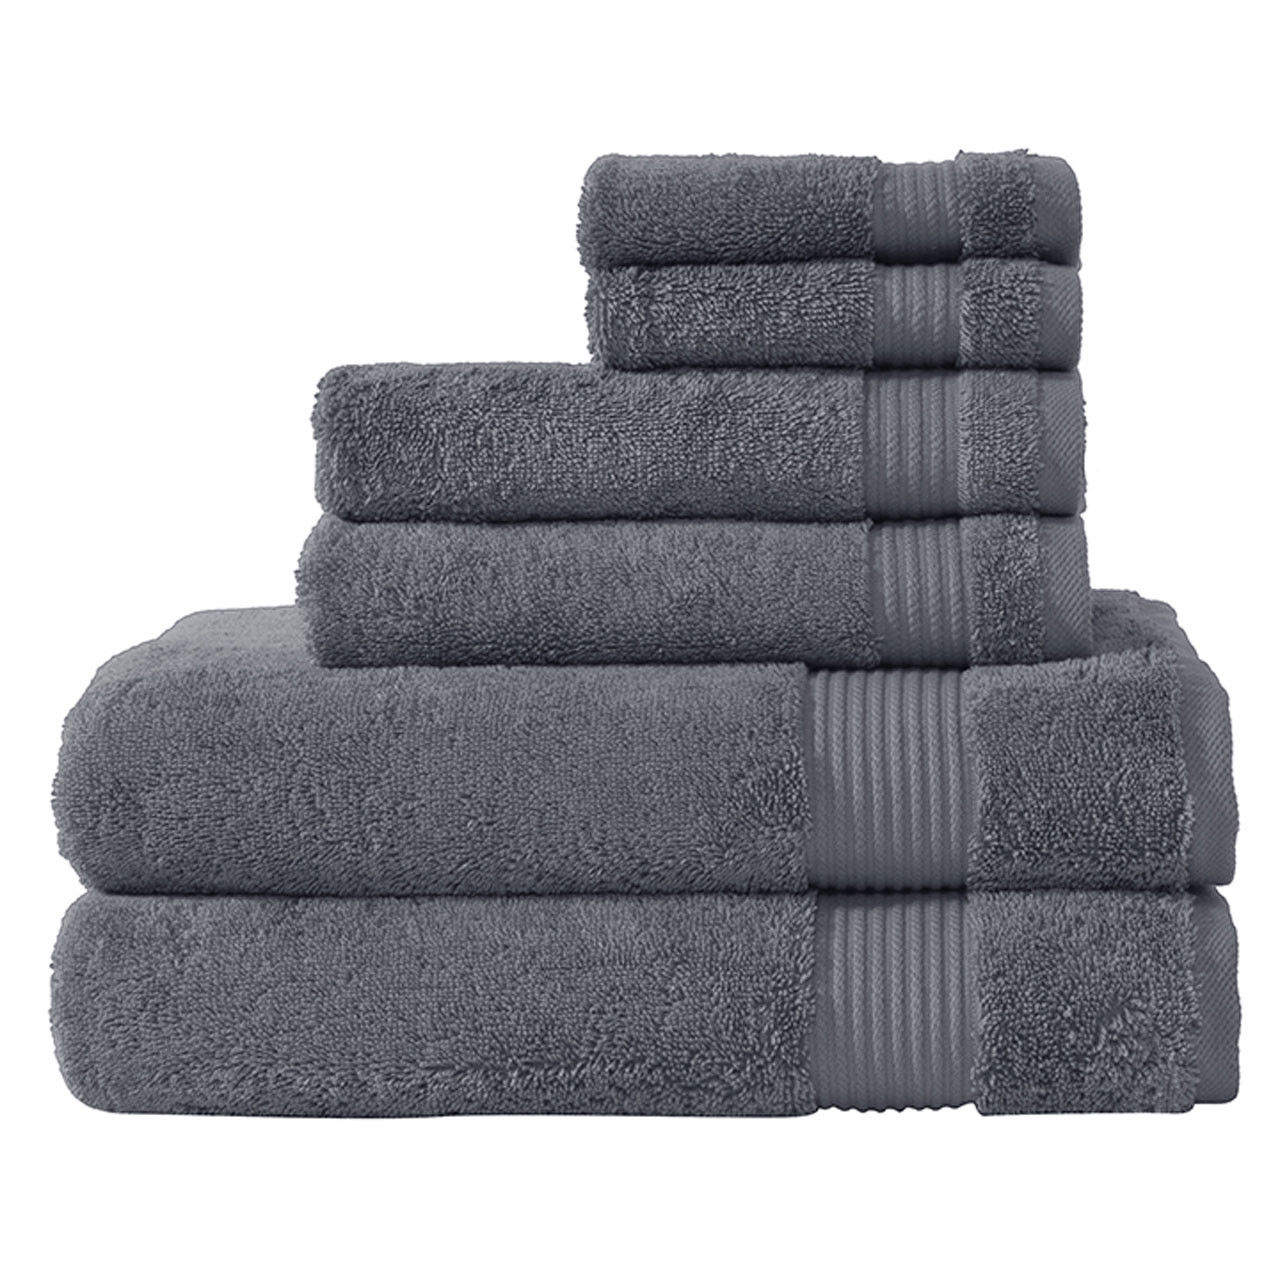 What design features are incorporated in the gray towels from the Amadeus Turkish Collection?